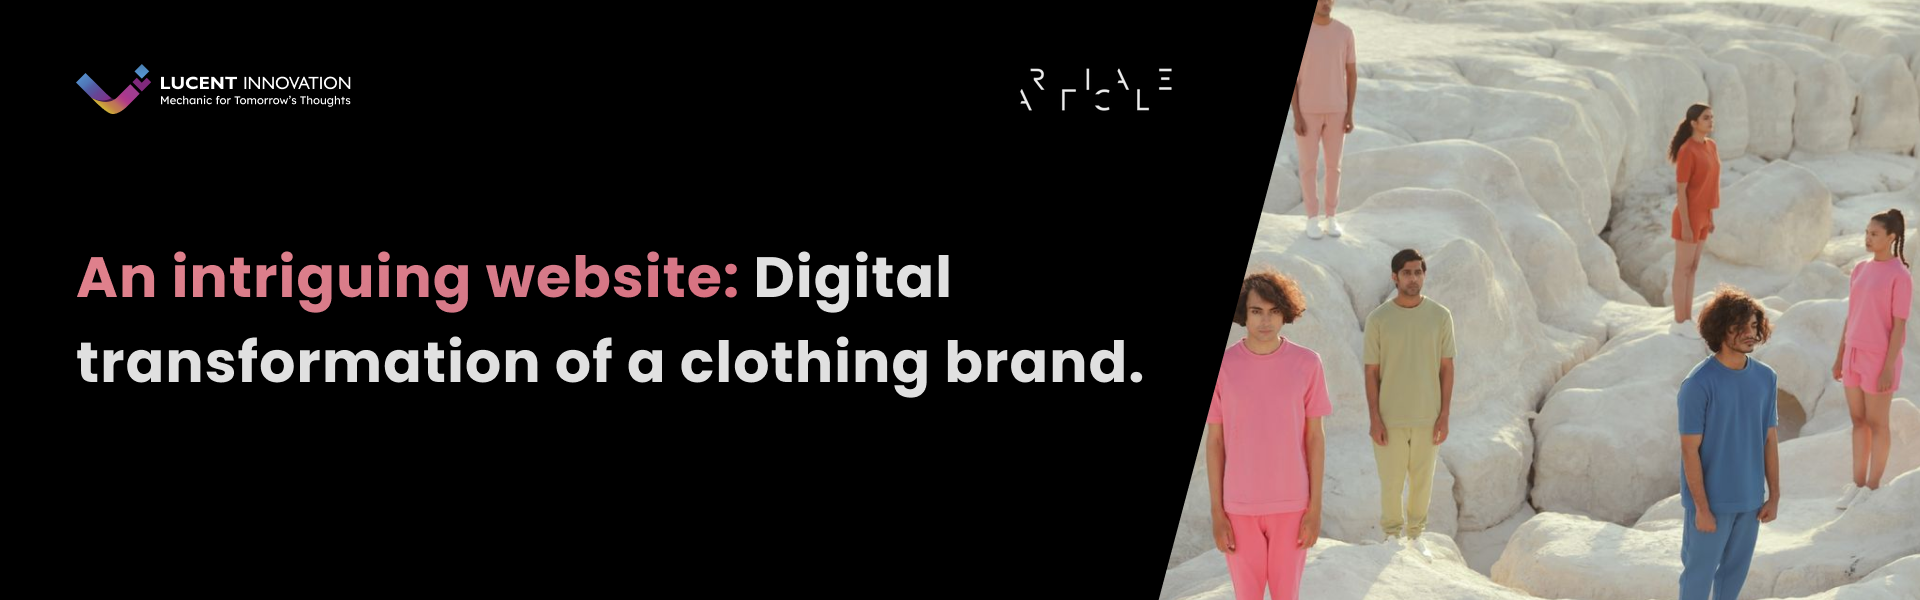 An intriguing website: Digital transformation of a clothing brand